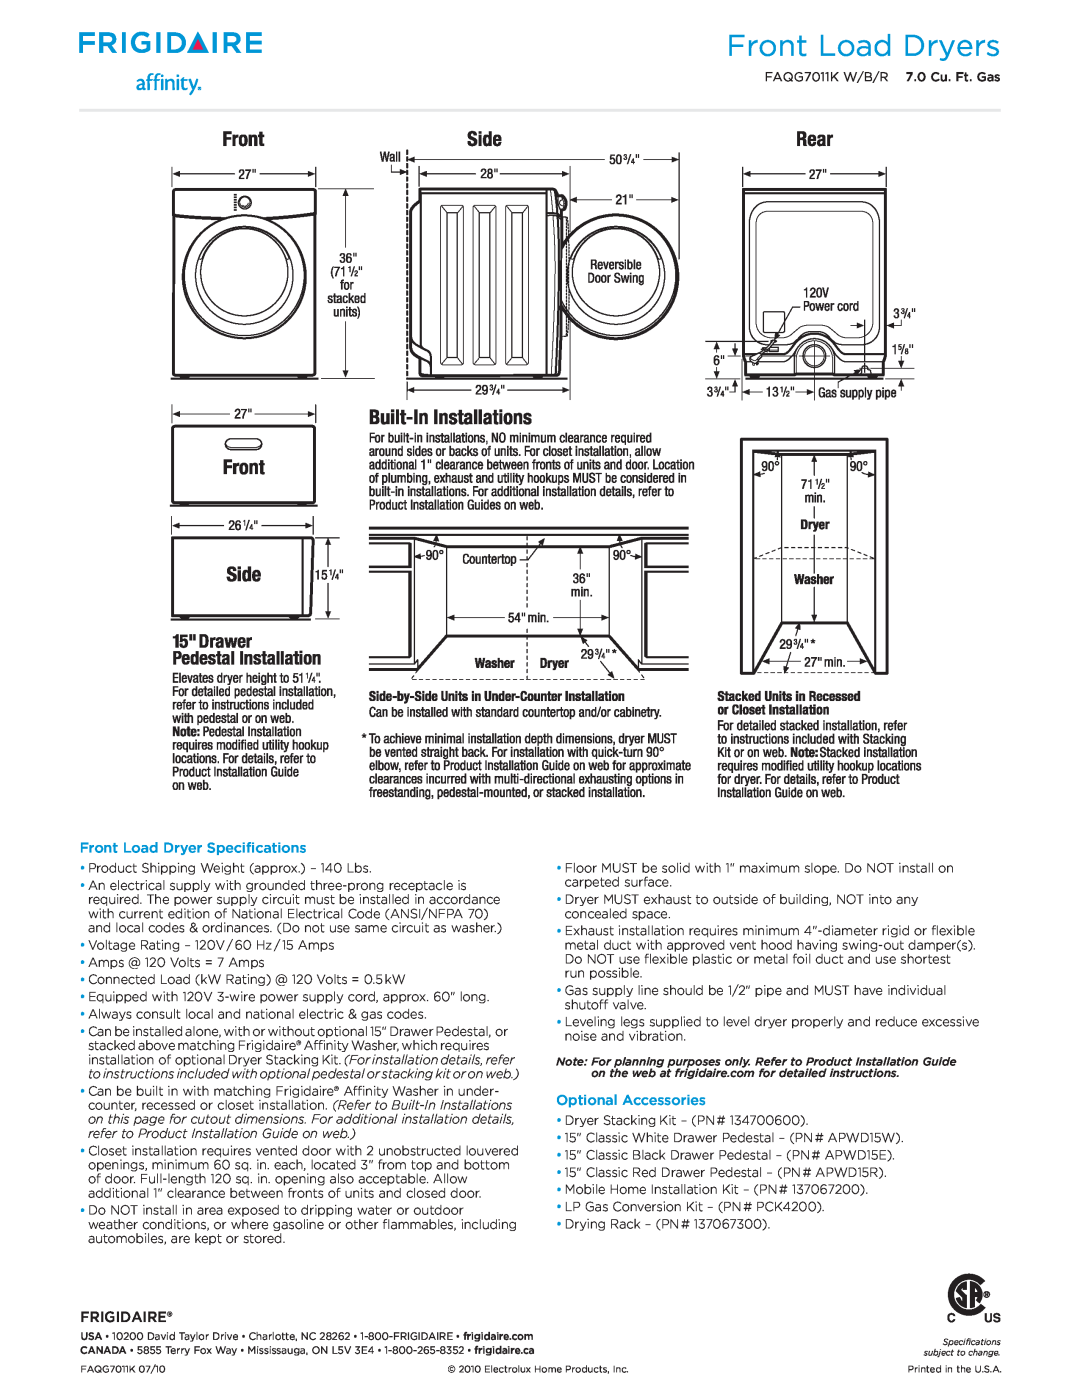 Frigidaire FAQG7011K W/B/R dimensions Front Load Dryer Specifications, Frigidaire, Optional Accessories, Front Load Dryers 